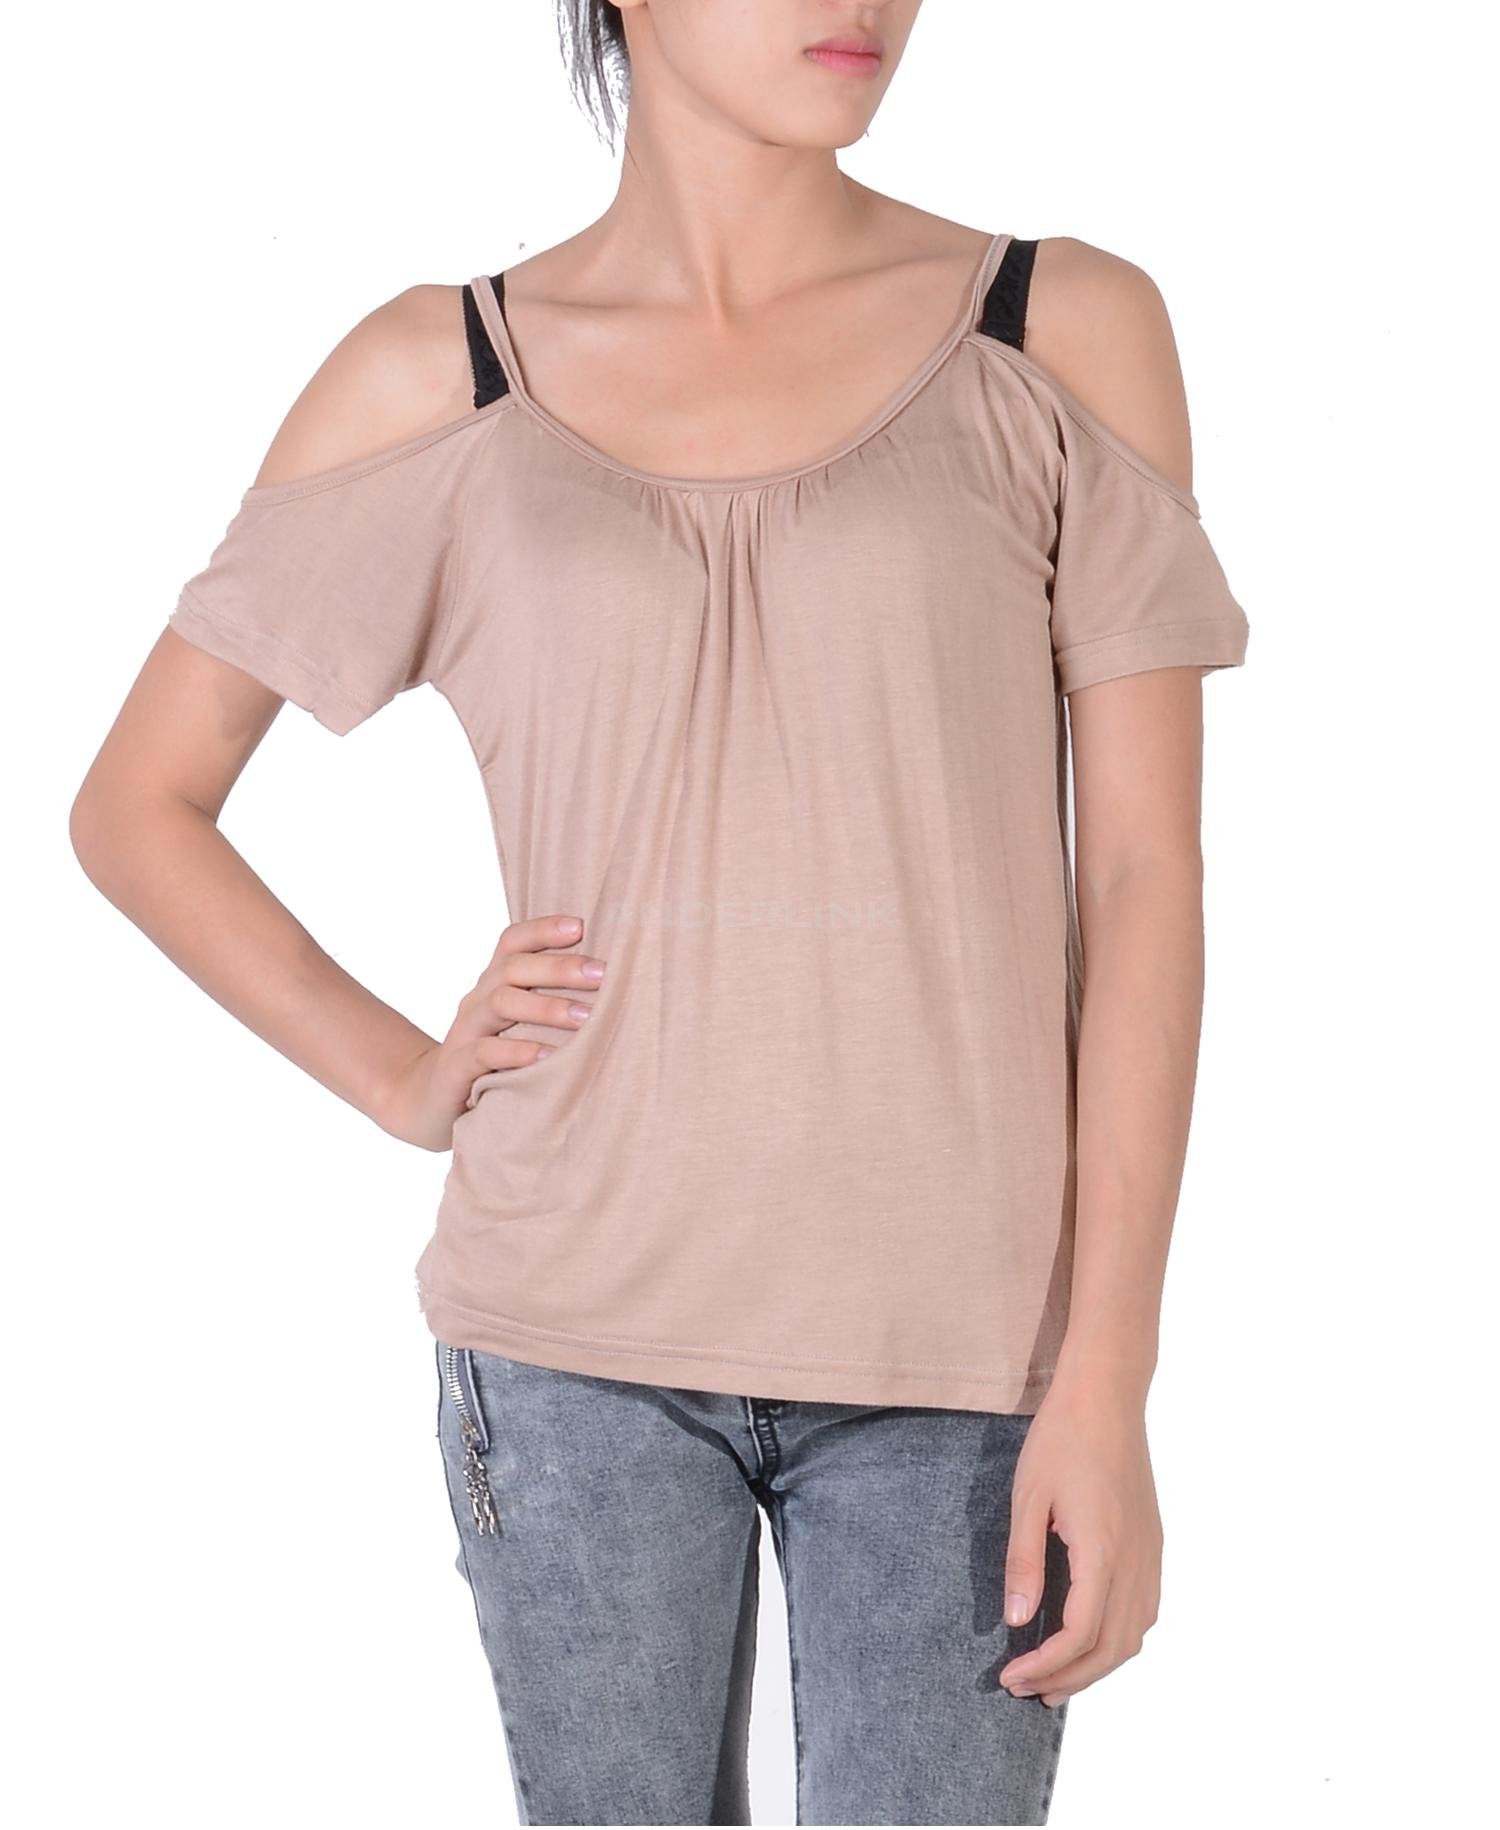 unknown Sexy Women's Girl Japan Style Hollow Shoulder T Shirt Blouse Tops